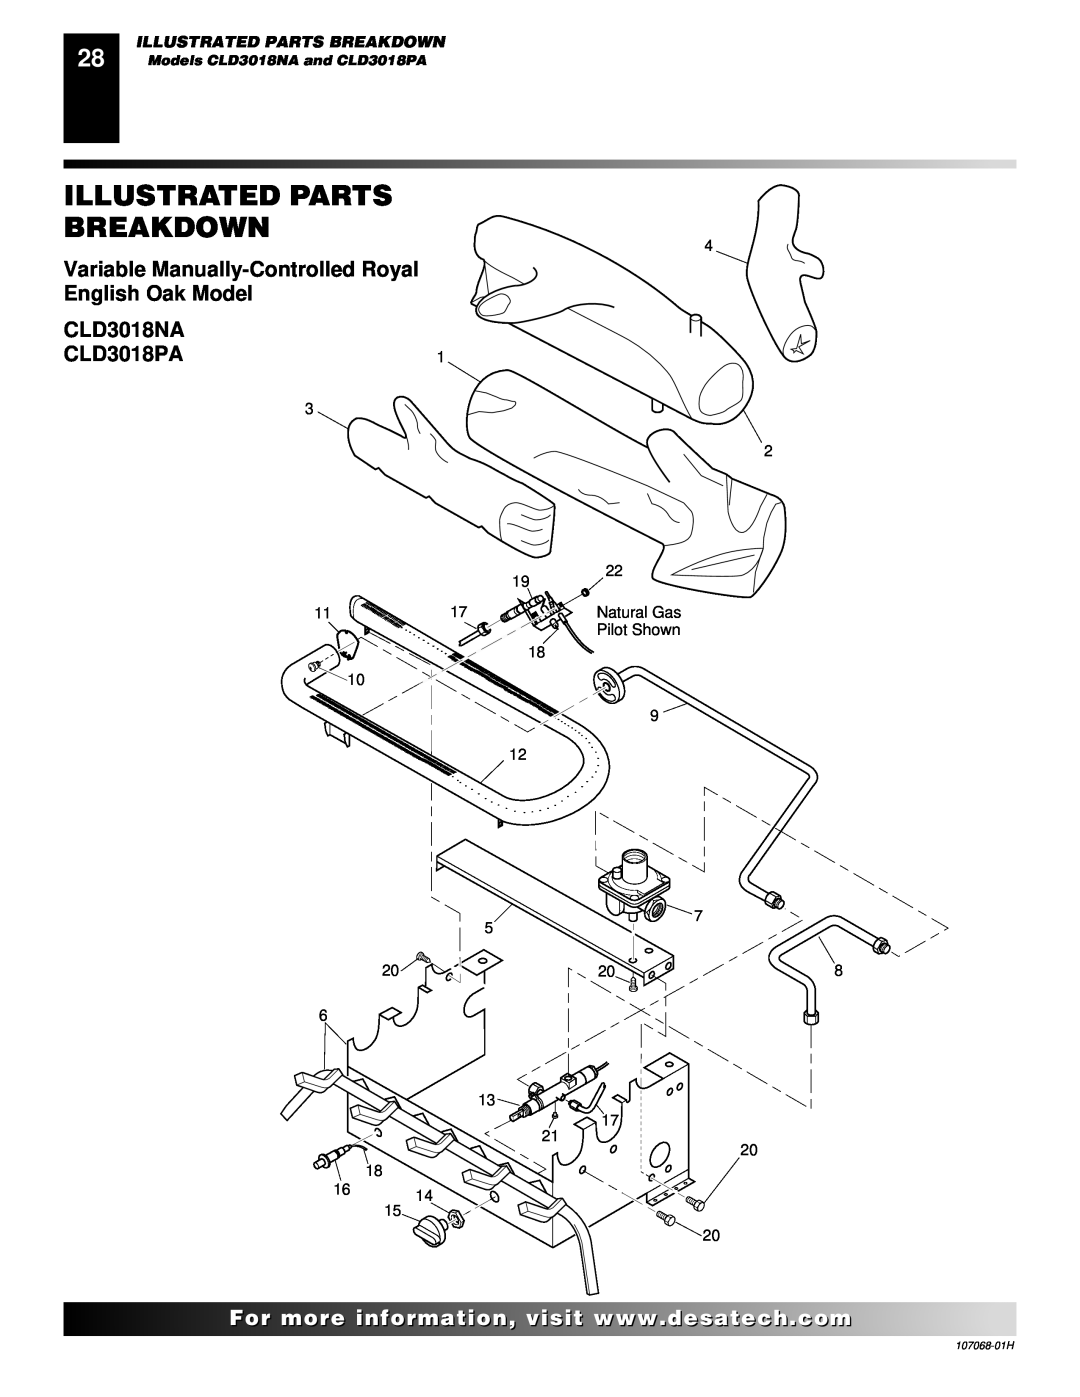 Desa CLD3018PT, CLD3018NT CLD3018NA CLD3018PA, Illustrated Parts Breakdown, Models CLD3018NA and CLD3018PA, 107068-01H 